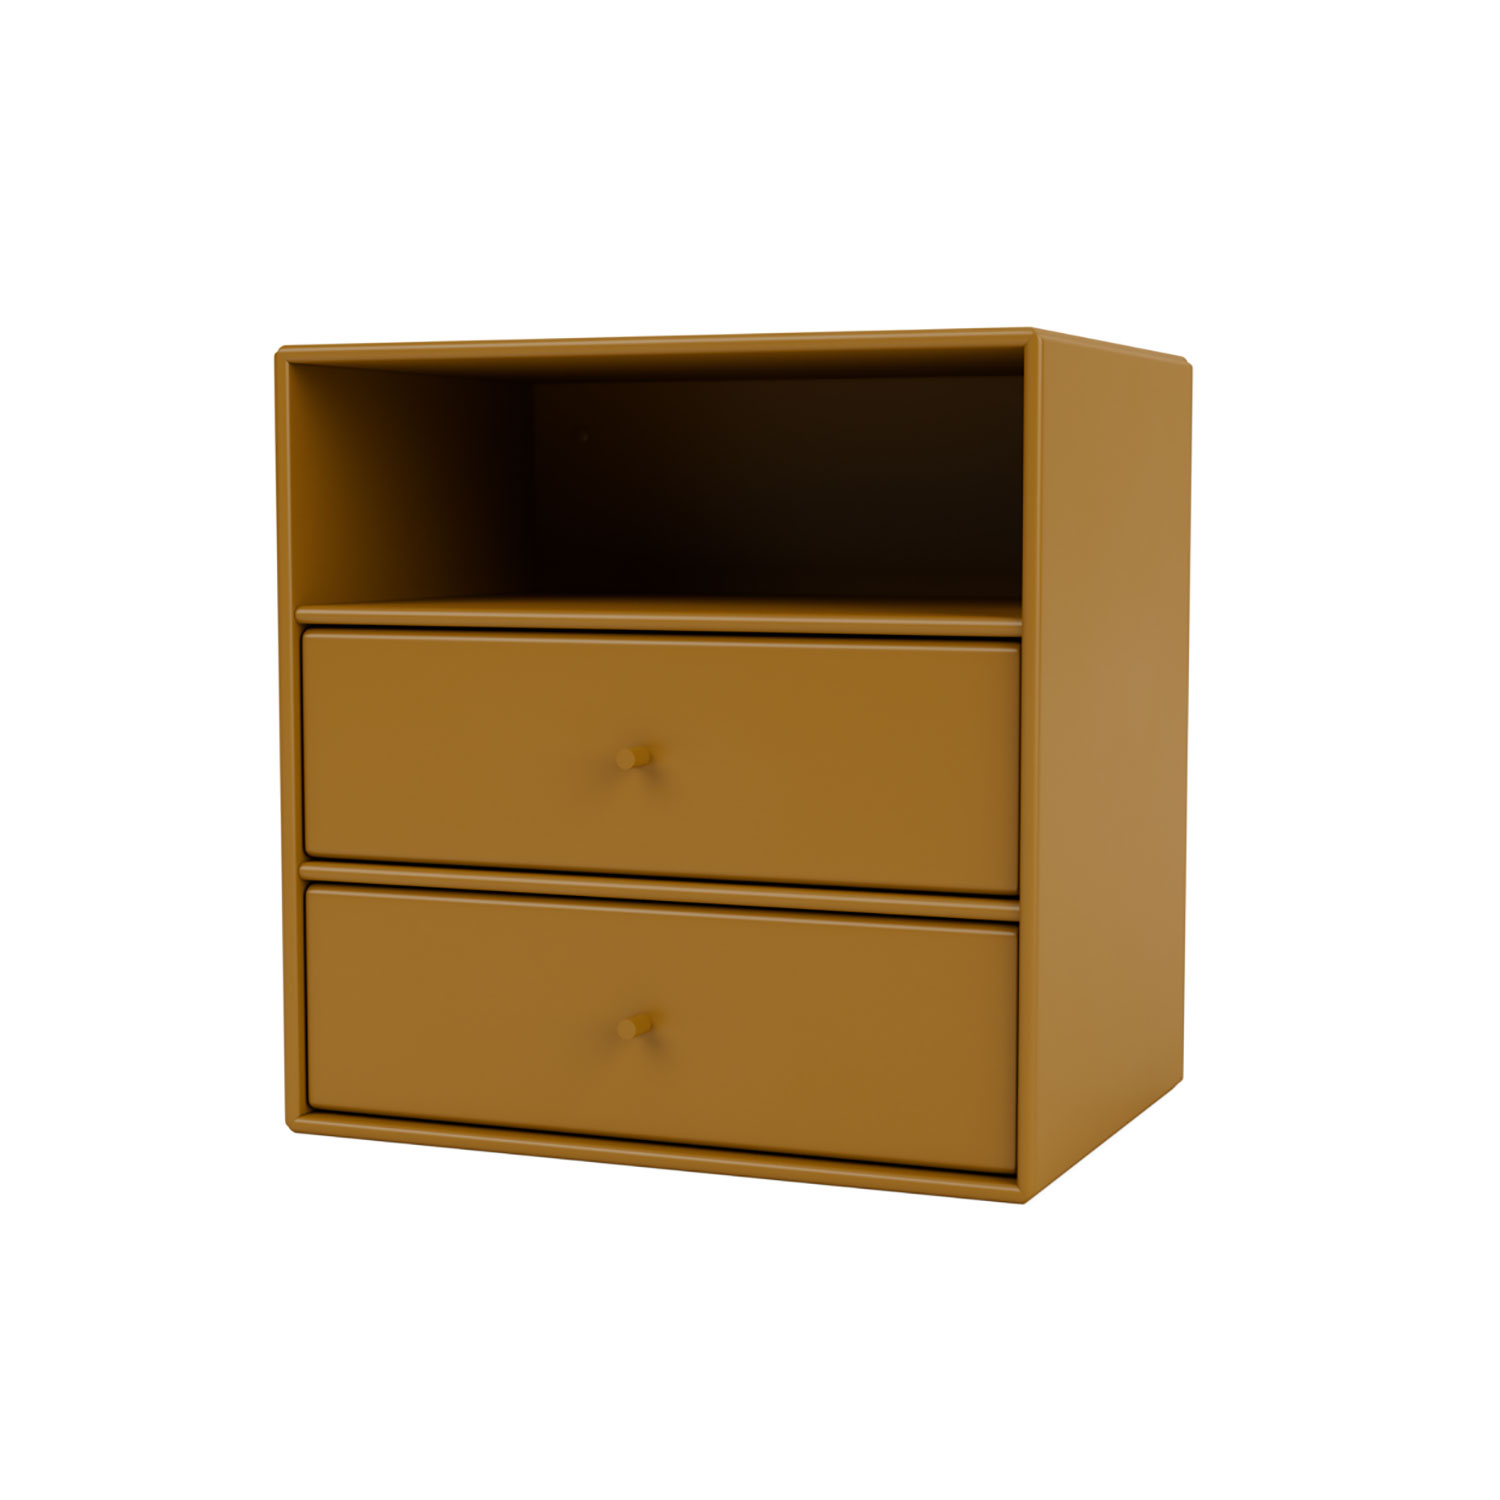 Mini 1006 with two drawers, Amber